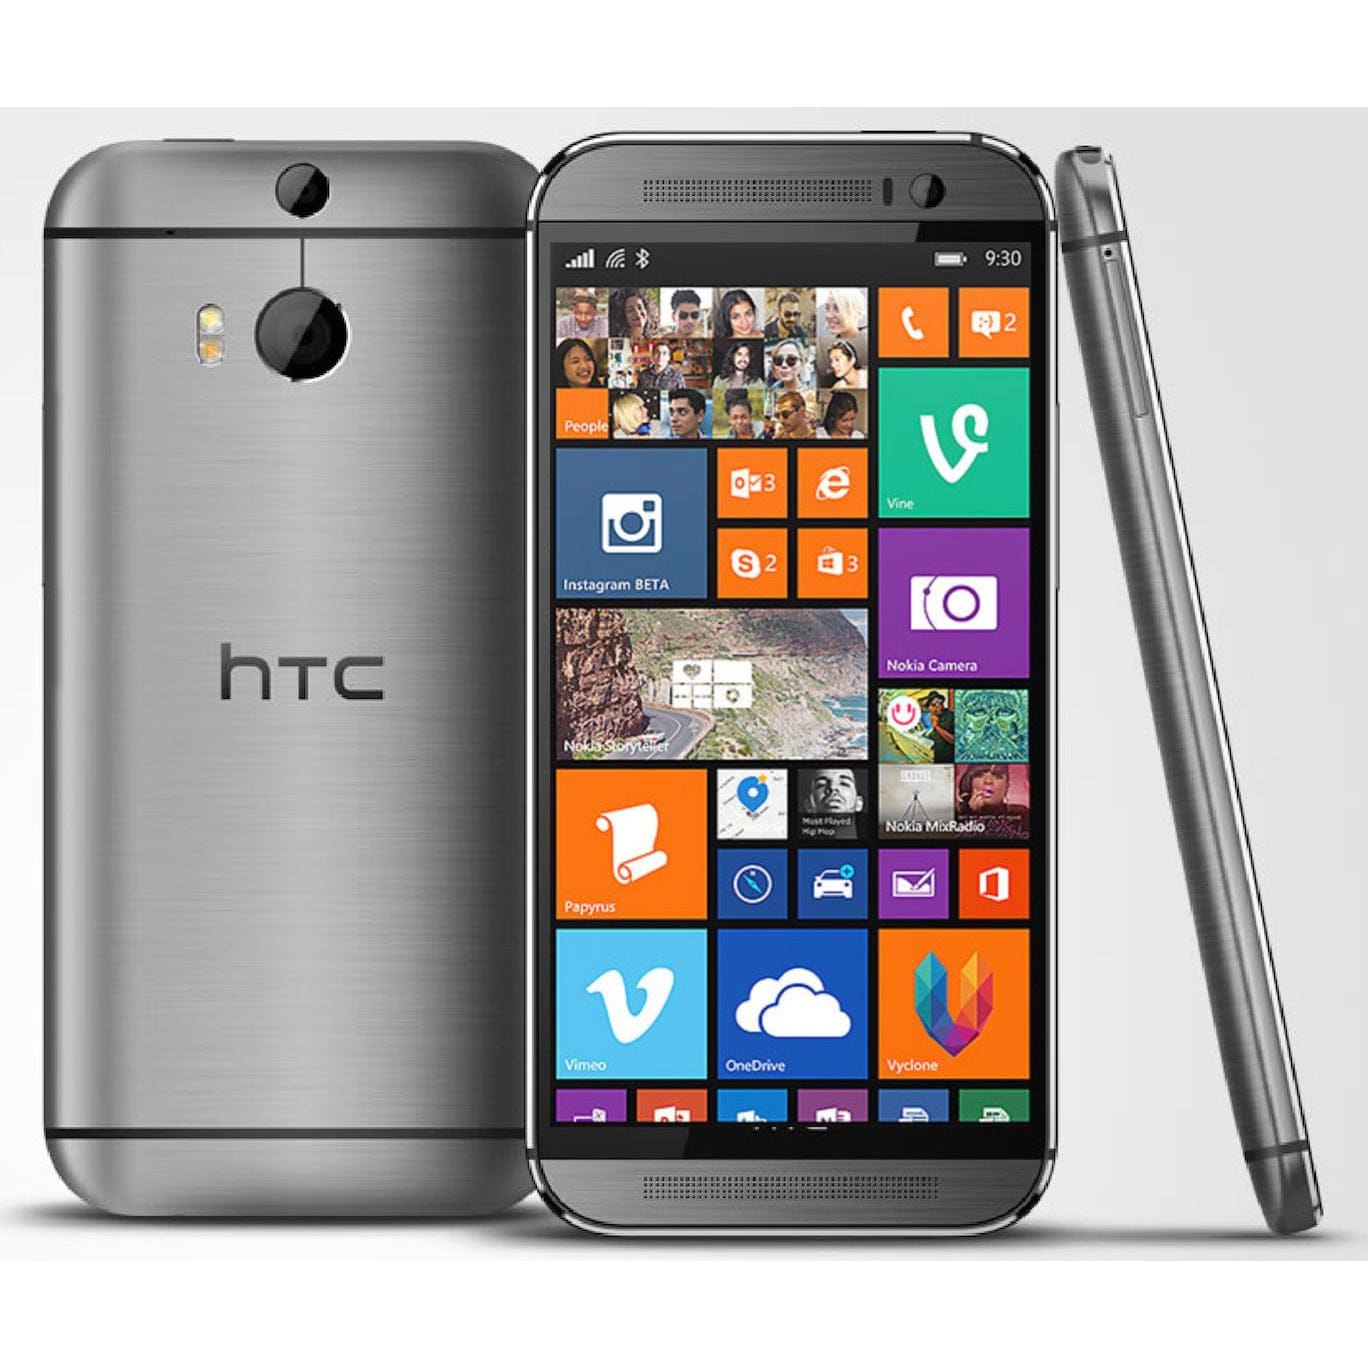 HTC  Unlocked-GSM HTC One (M8) for Windows (Gray) - No Contract